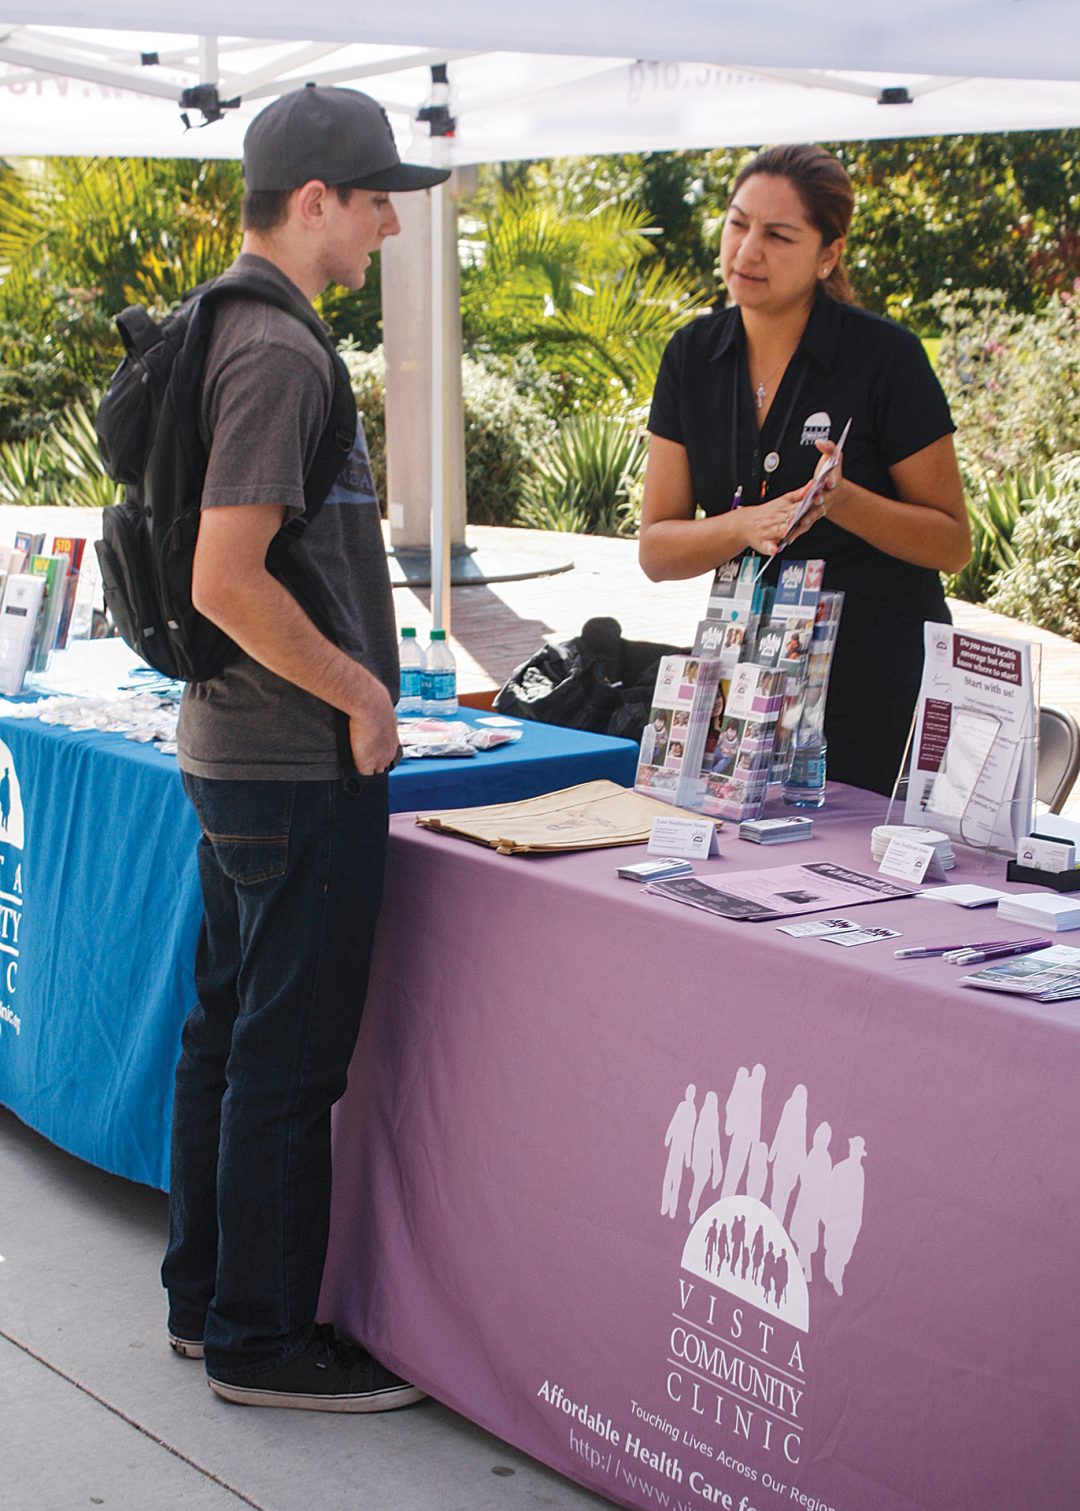 Palomar Students Have Health Care Through Health Services On Campus 